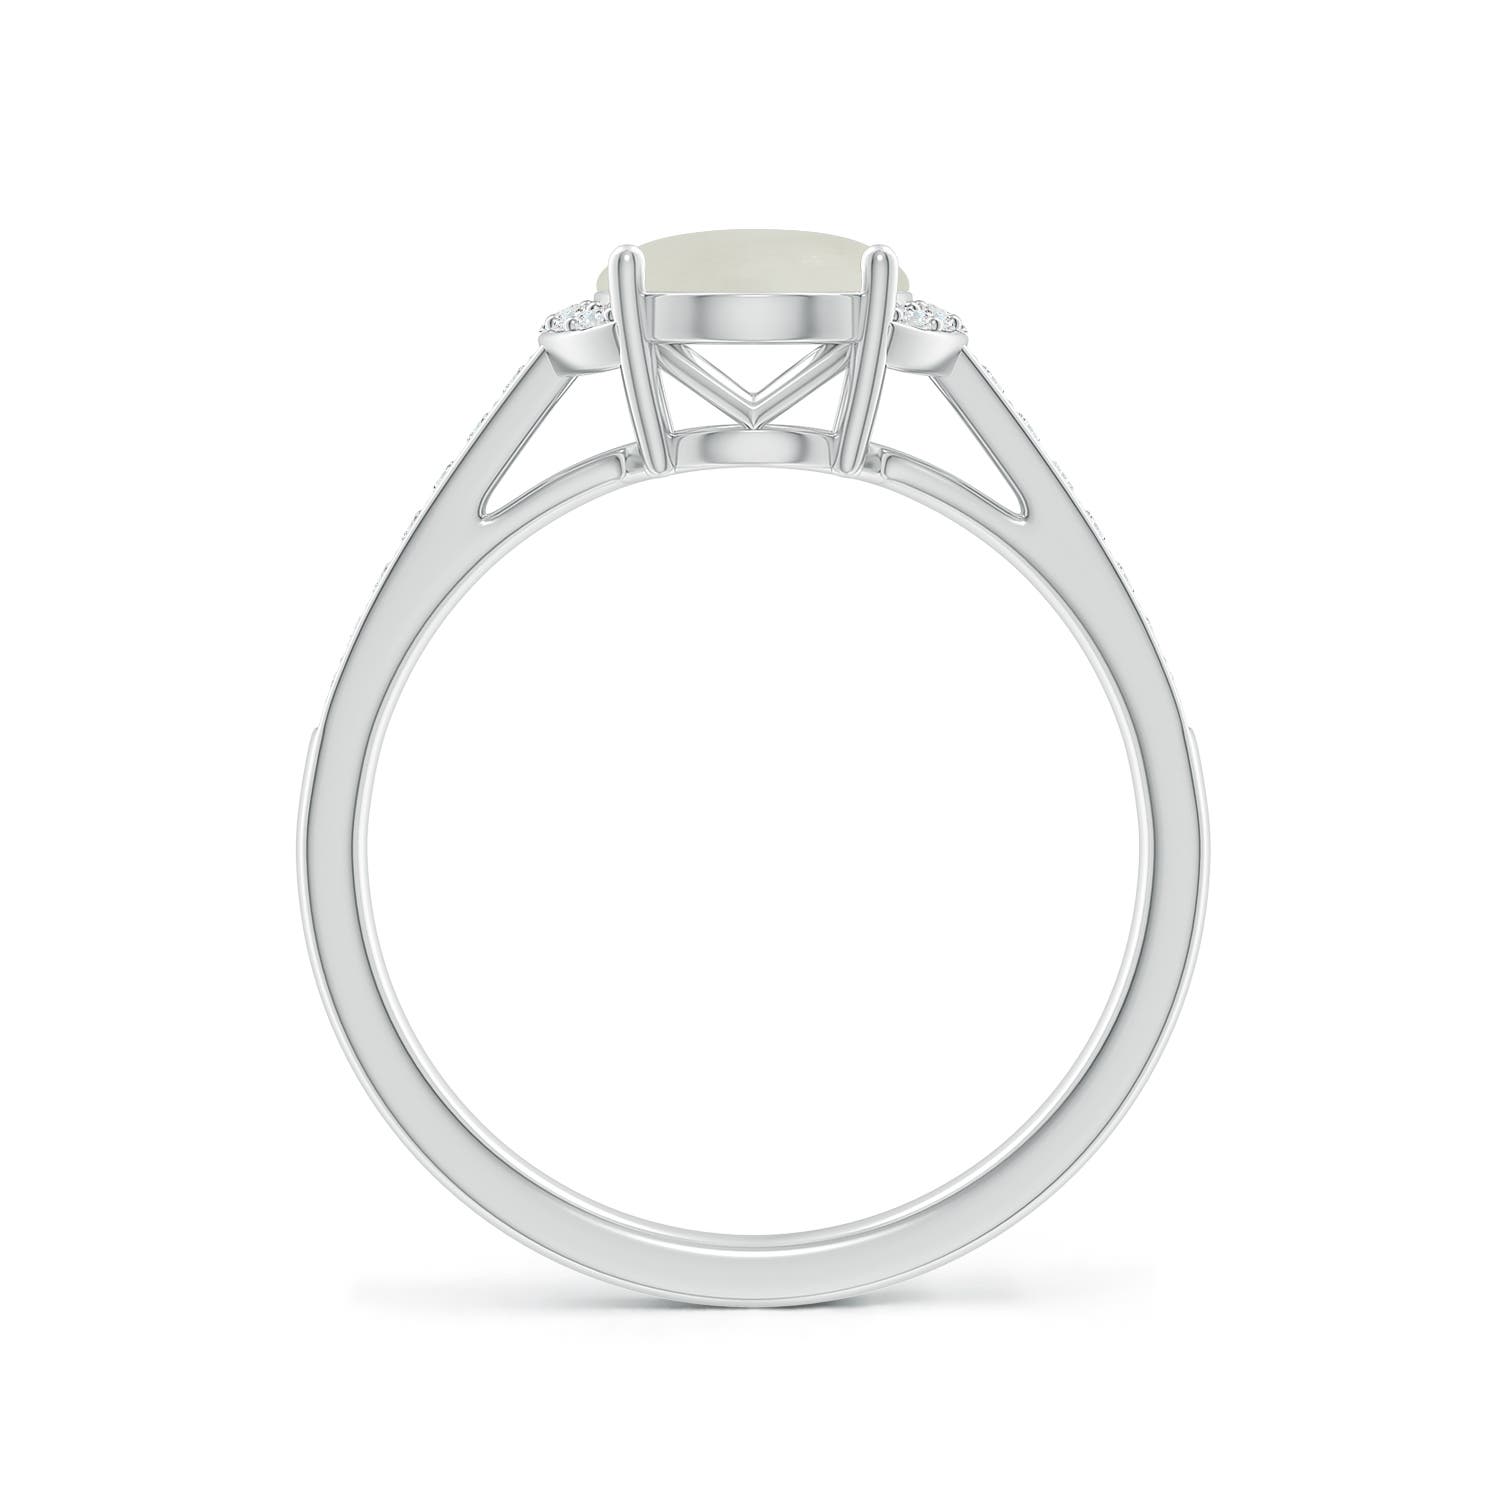 AAA - Moonstone / 1.88 CT / 14 KT White Gold